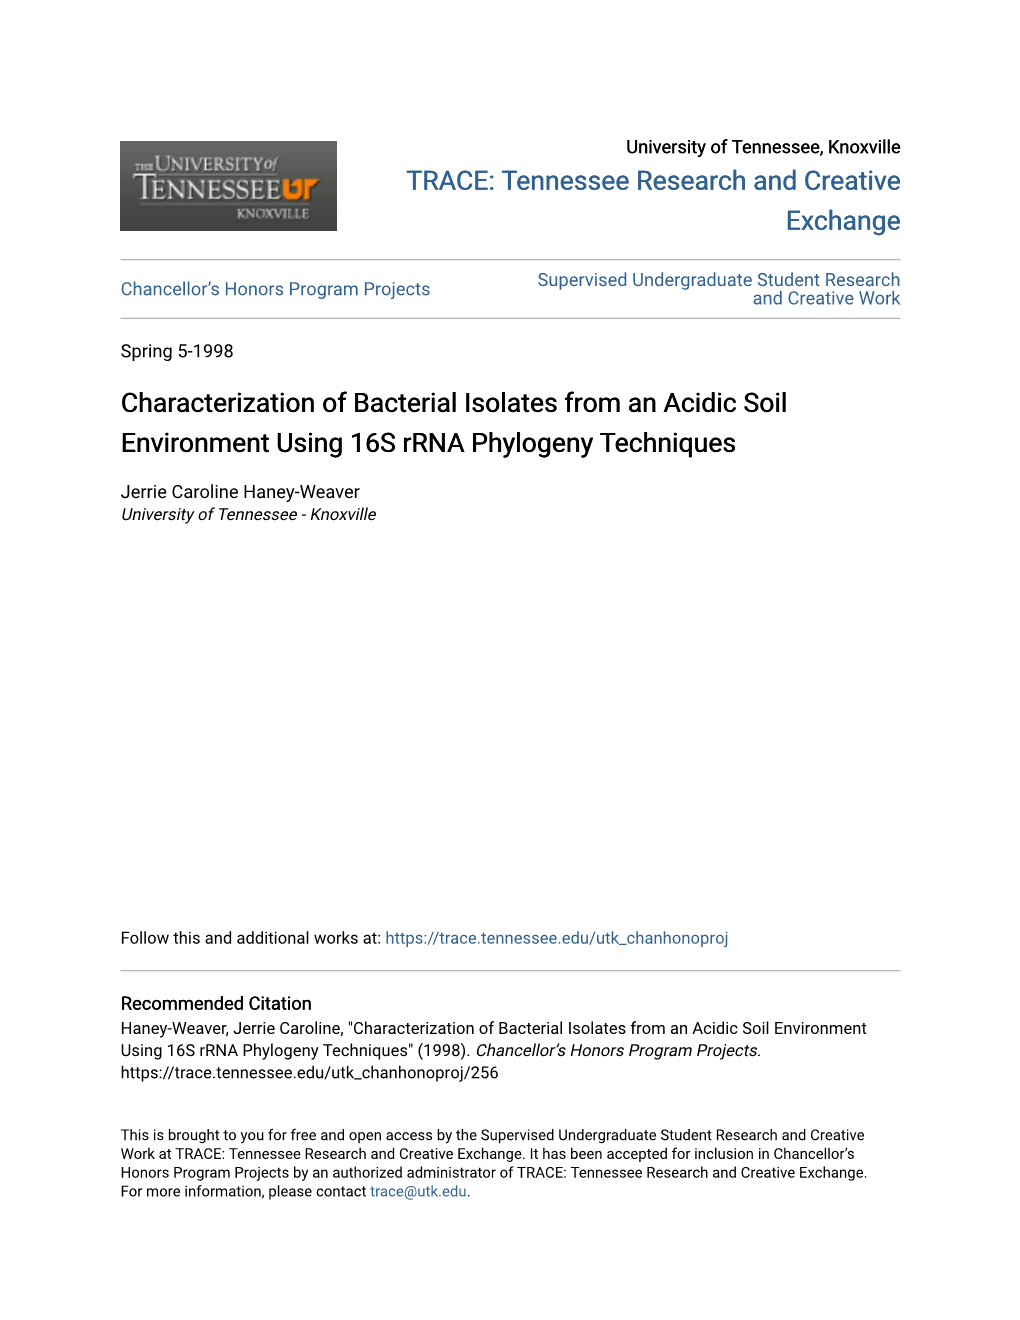 Characterization of Bacterial Isolates from an Acidic Soil Environment Using 16S Rrna Phylogeny Techniques